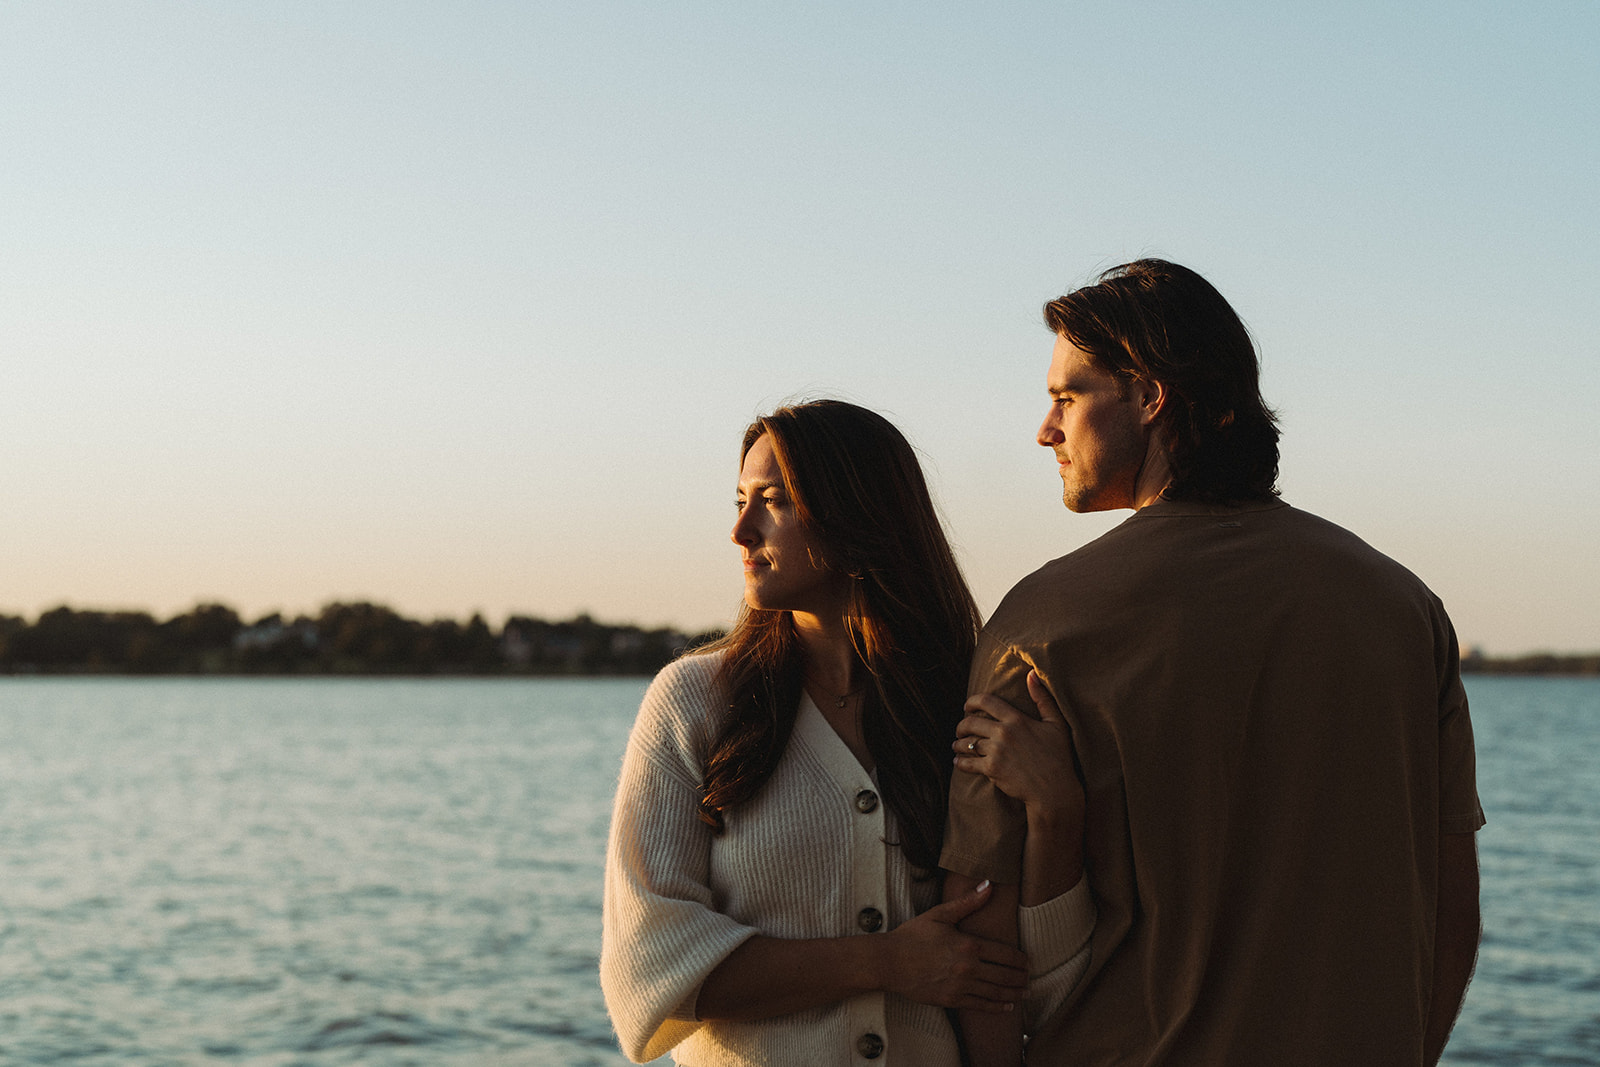 Engagement Session At White Rock Lake In Dallas, Texas